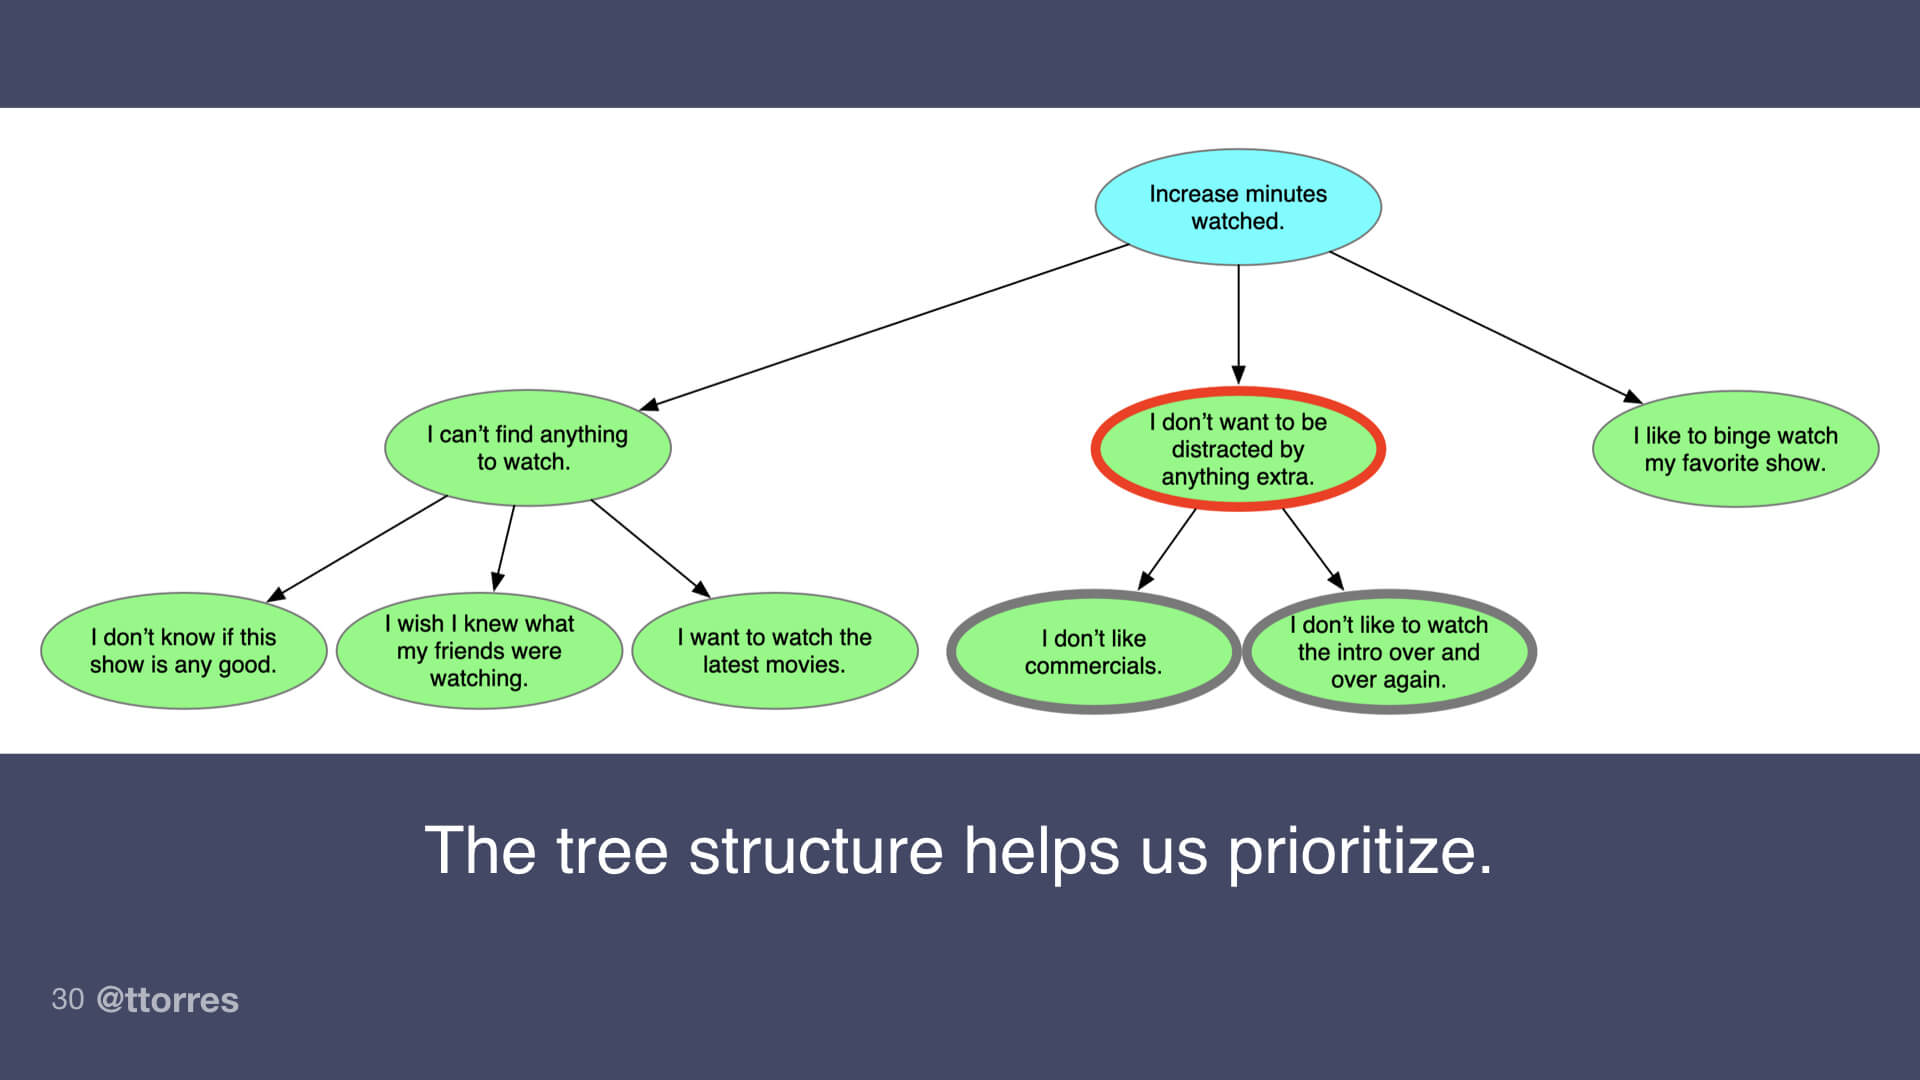 A small segment of an opportunity solution tree. Some opportunities are highlighted in different colors.